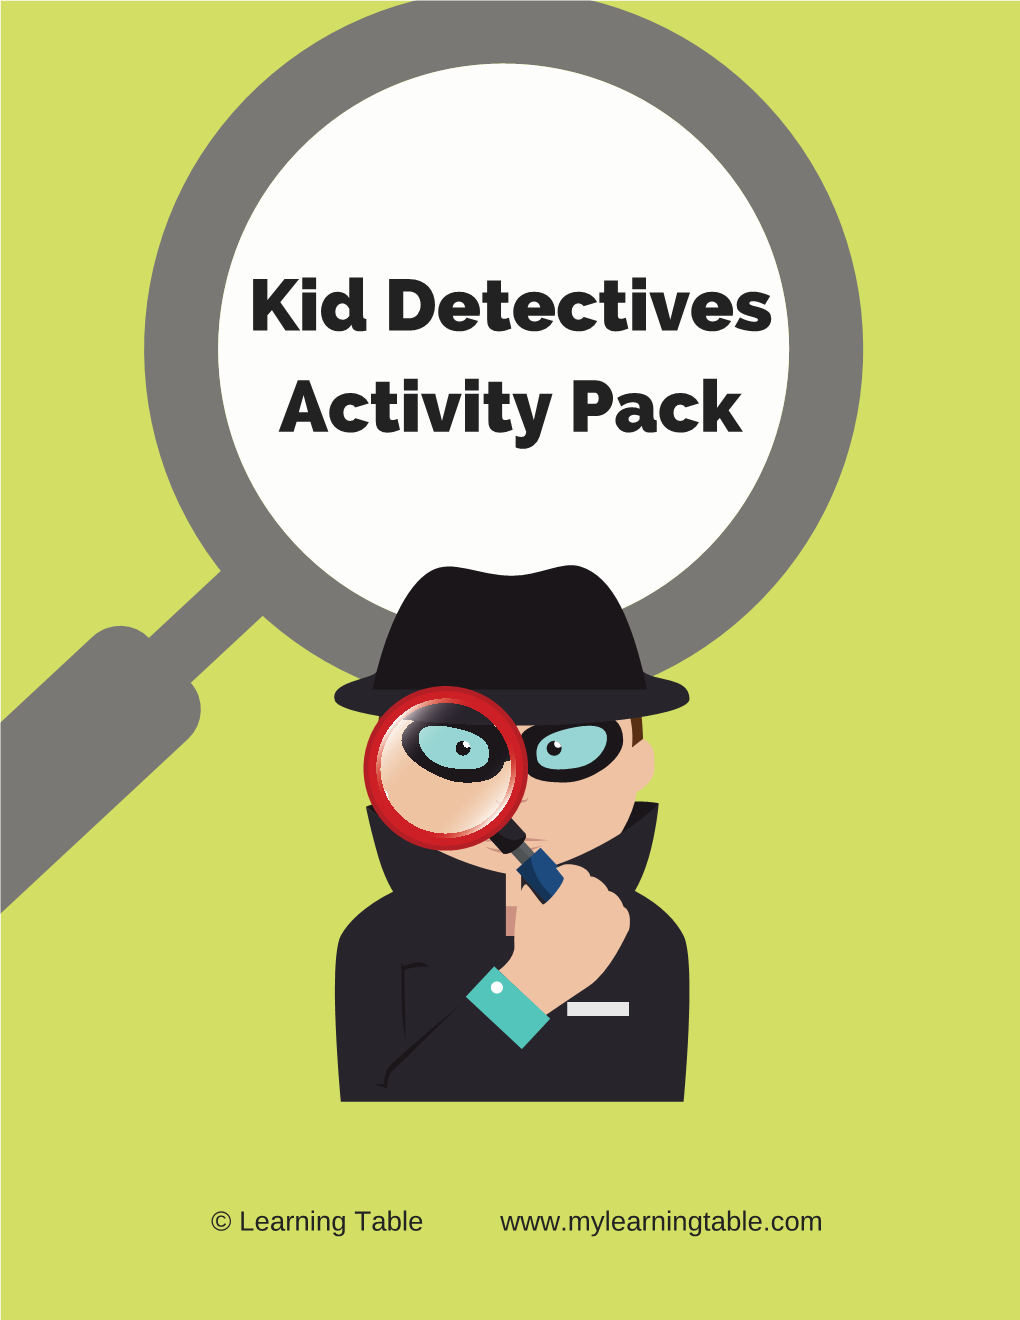 Activities for Kid Detectives